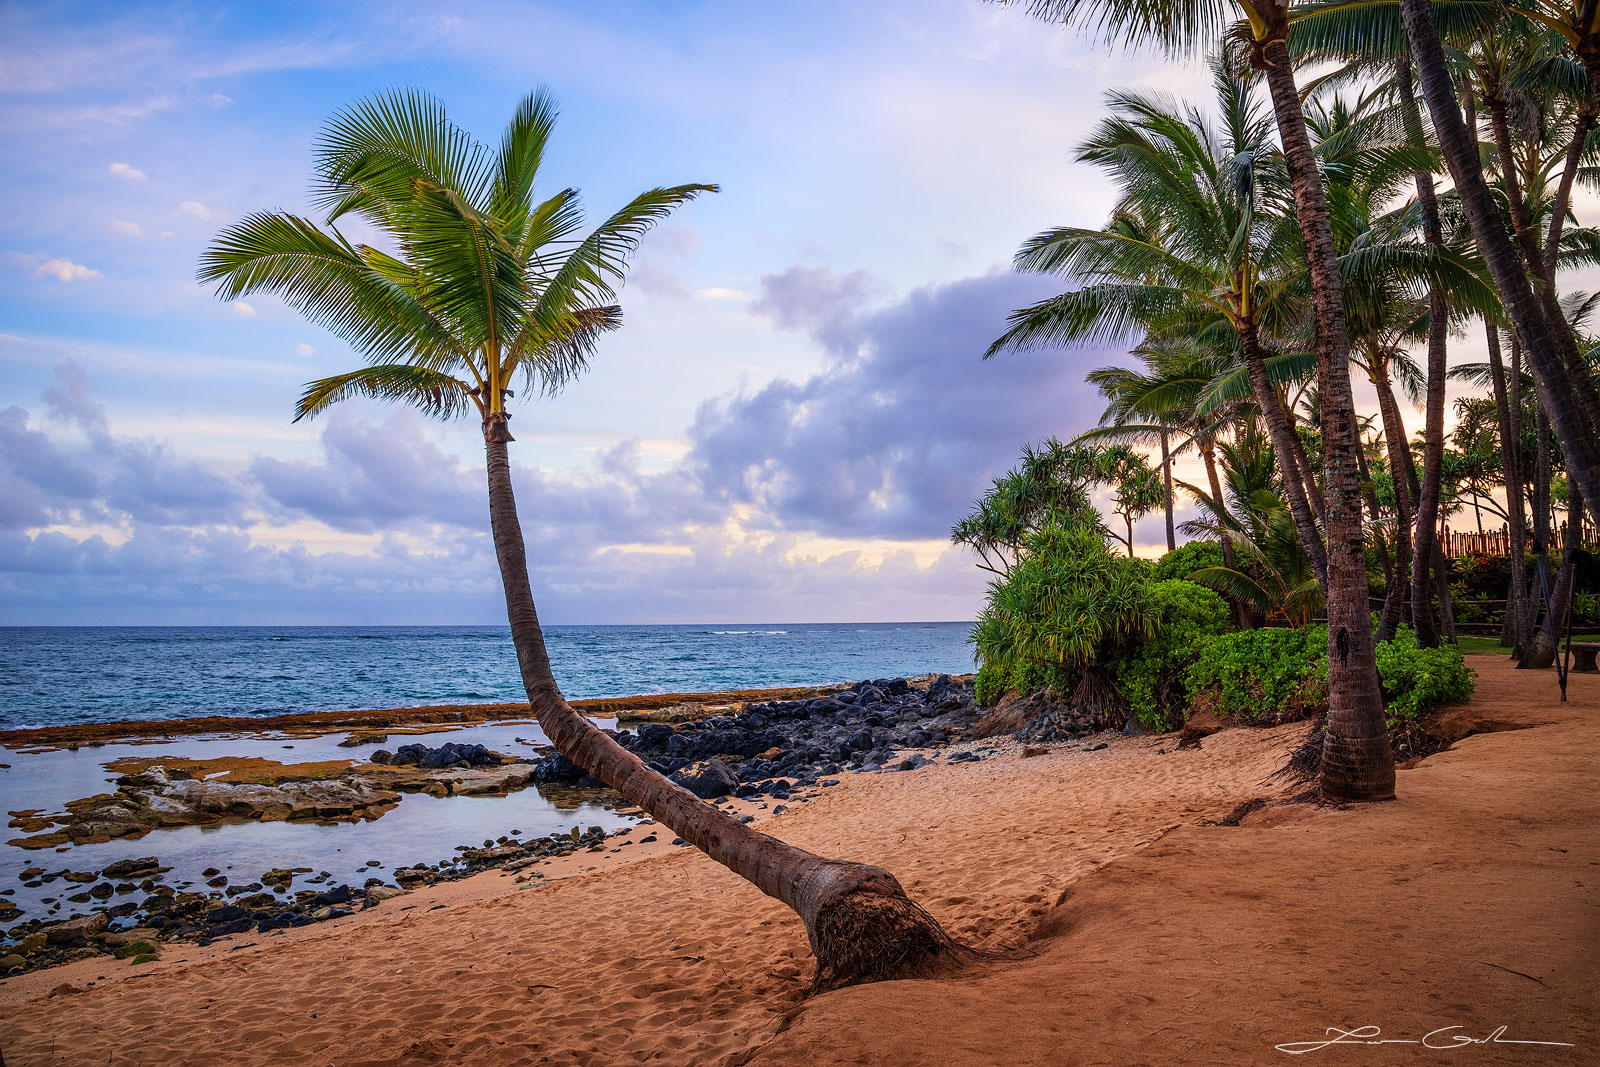 Bent palm tree reaching out towards calm ocean on a sandy Maui beach at dawn, with distant palm trees, rocks, tide pools, and a horizon scattered with clouds under a clear blue sky - Gintchin Fine Art